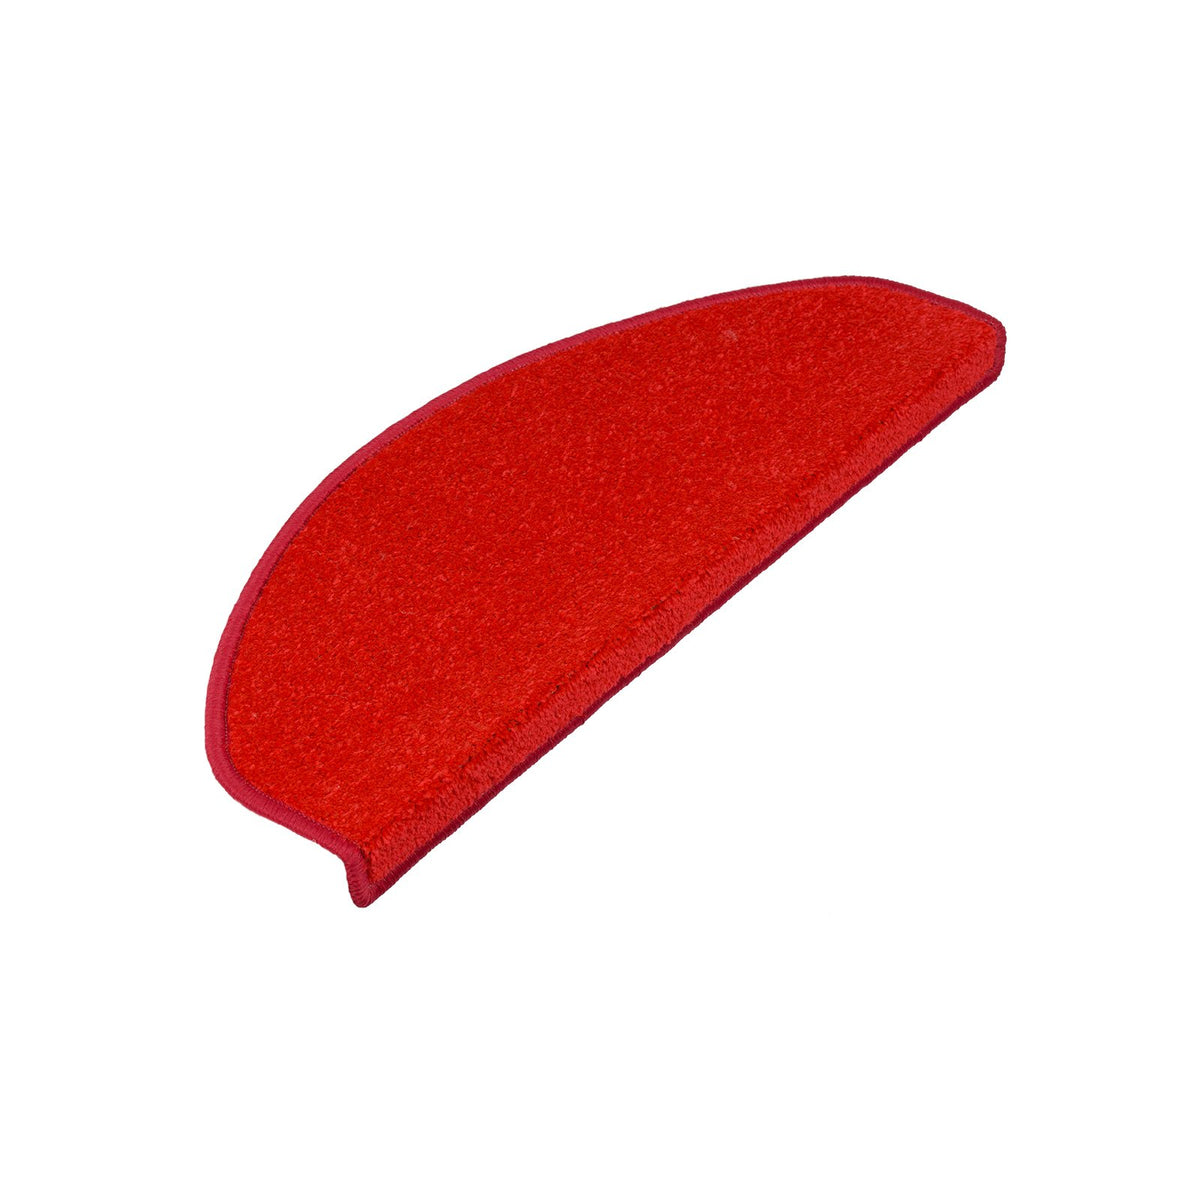 F1_fd-18510,fd-29022 | Rouge | Semicirculaire